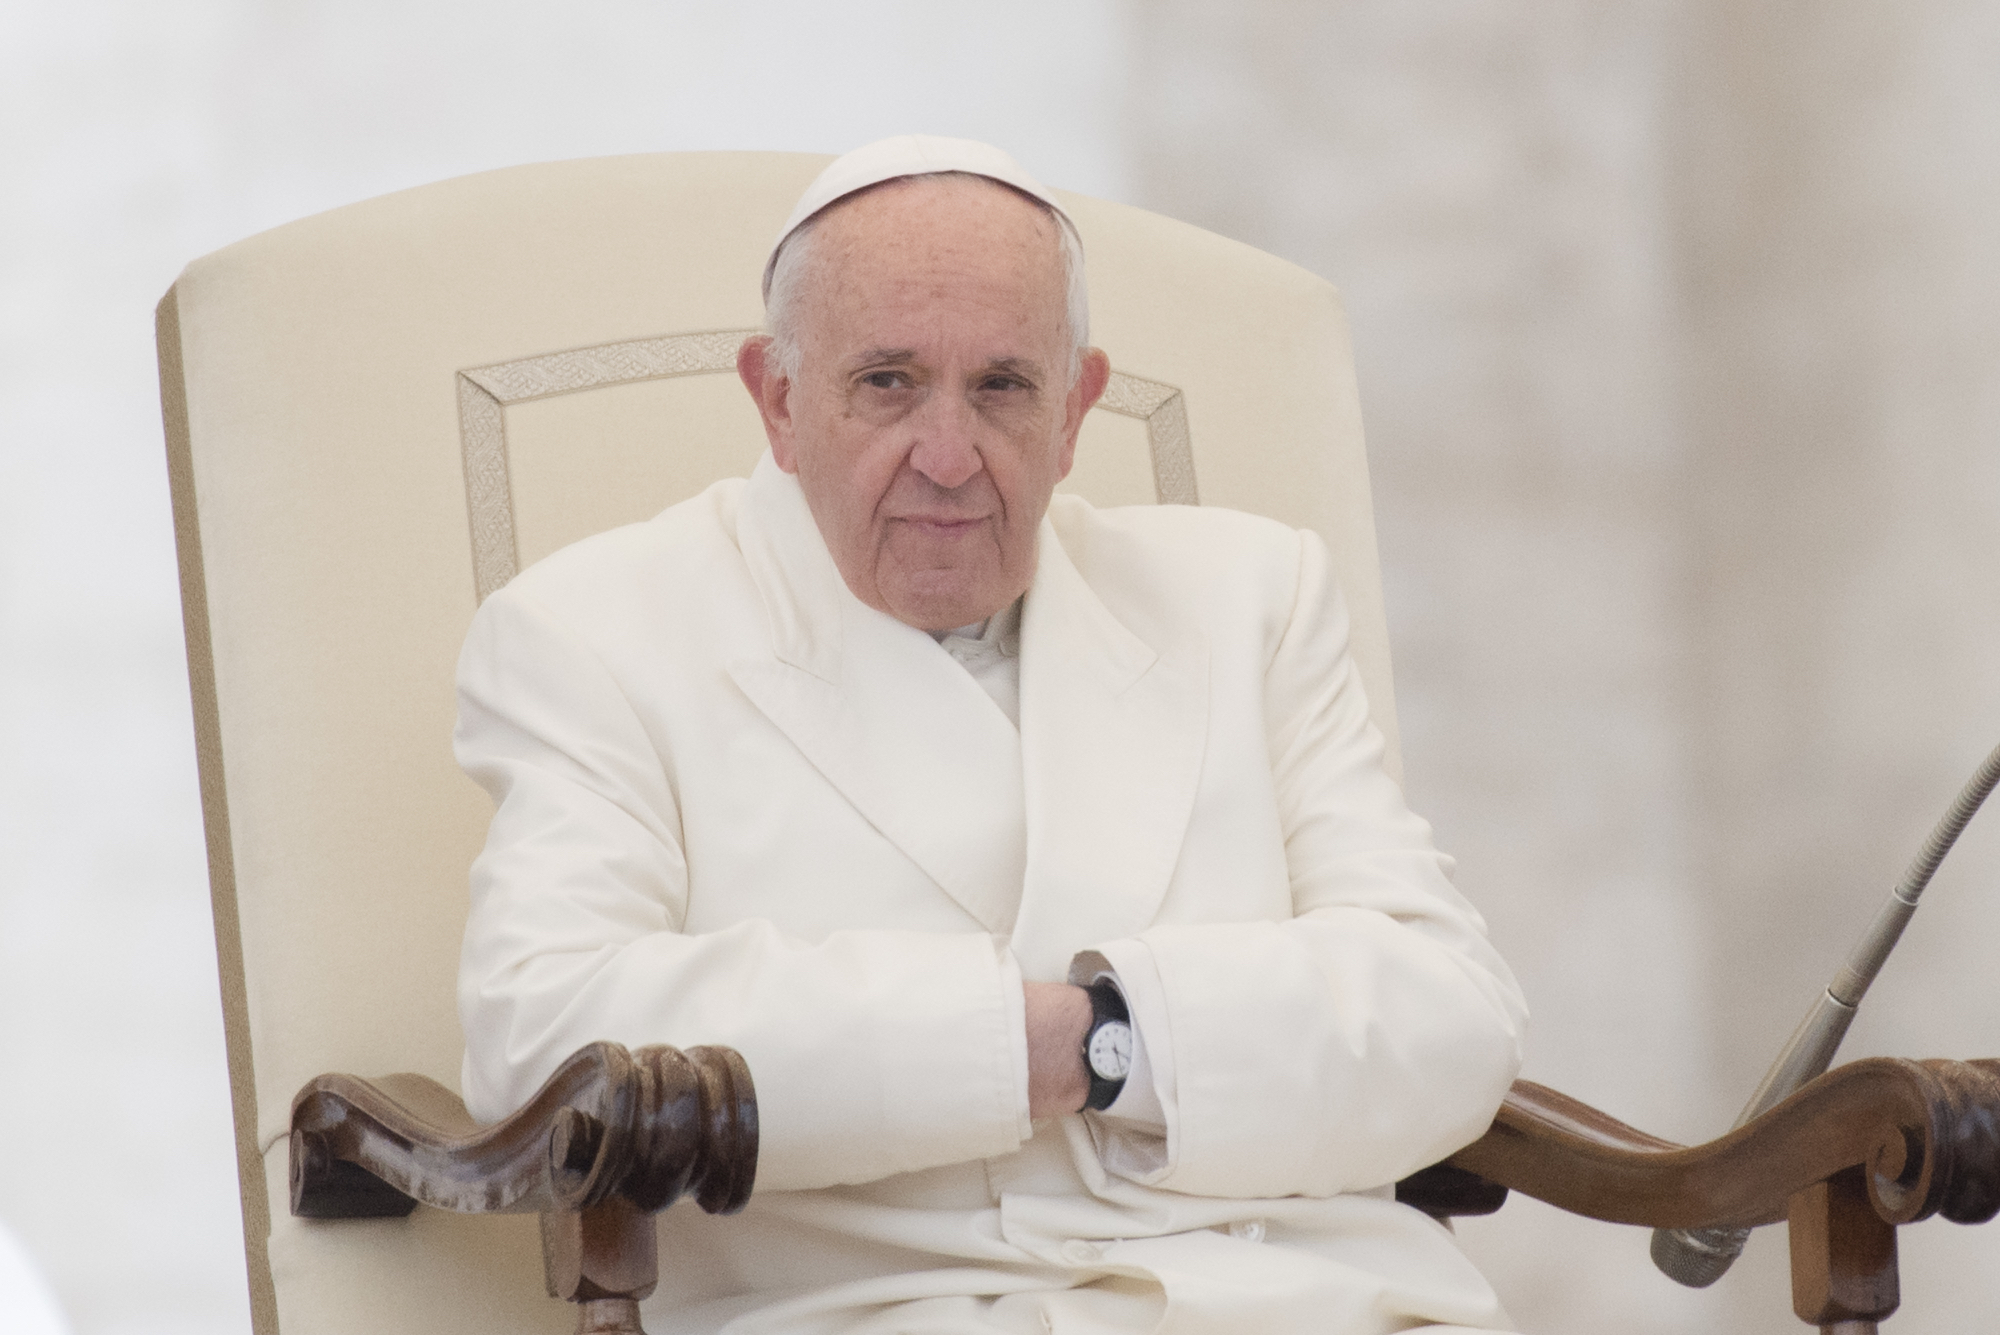 Leading Vatican observer claims ‘Francis revolution almost over’